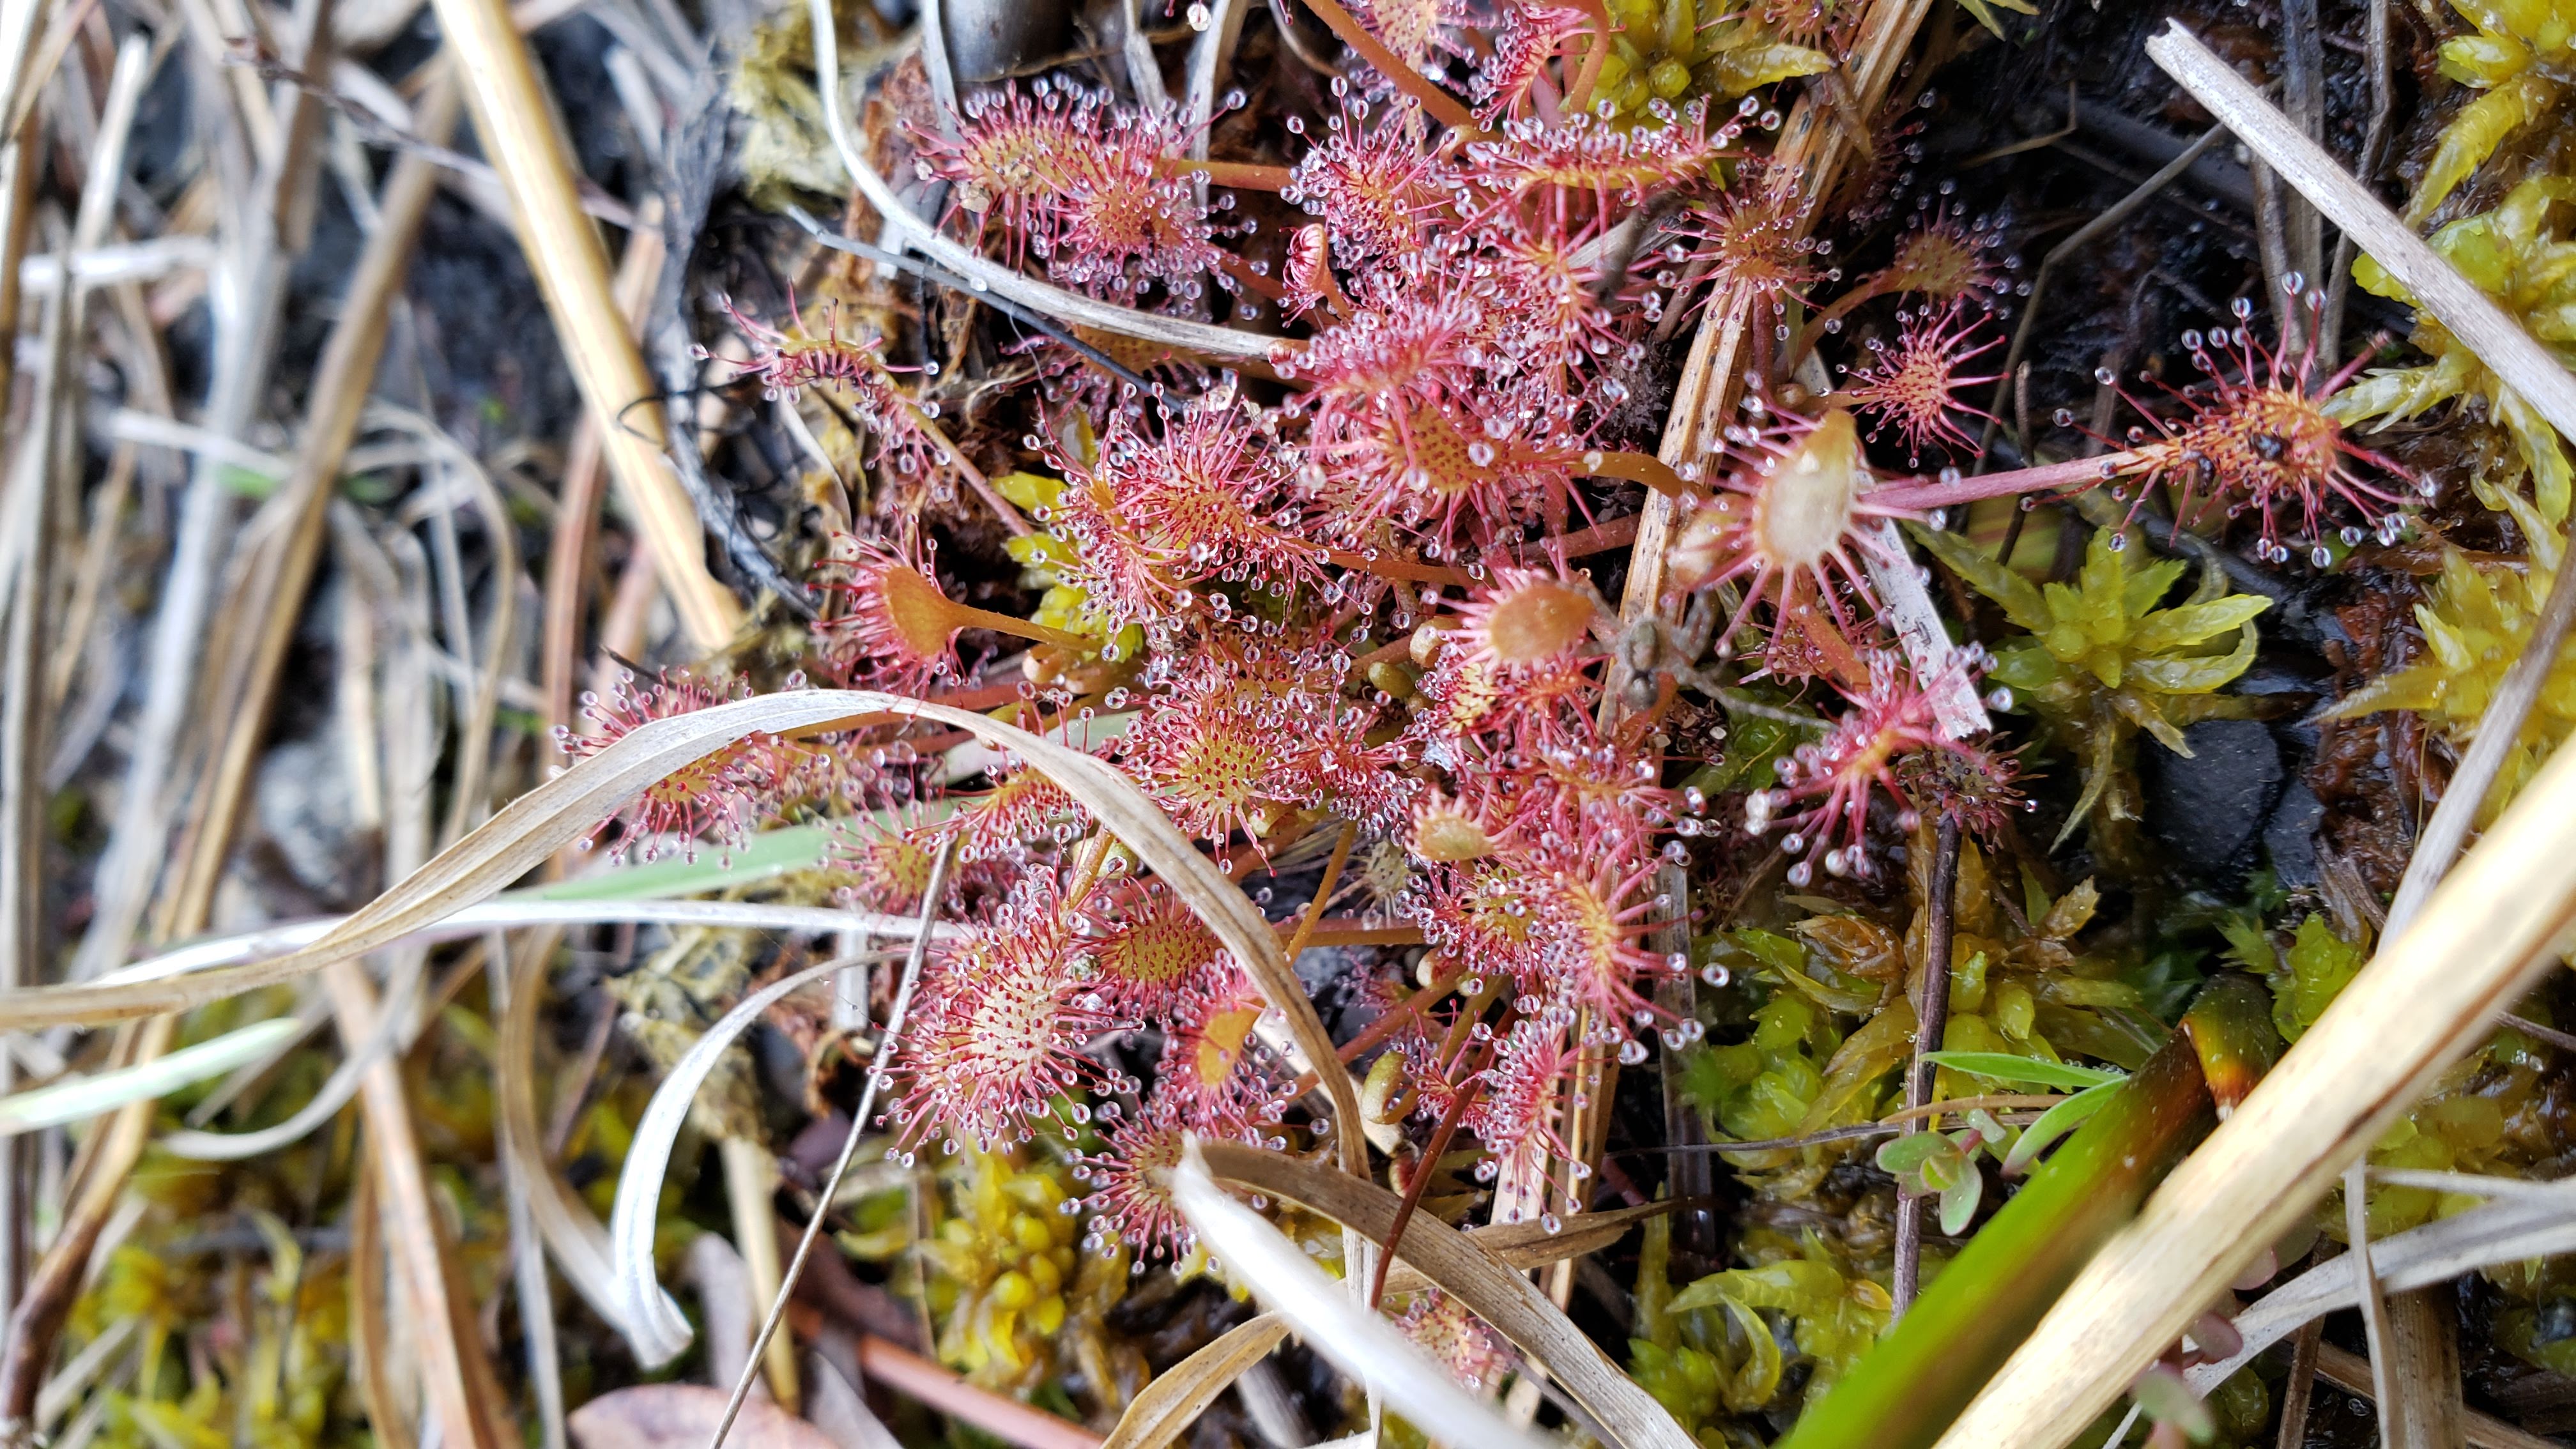 a group of spatulate leaved sundews a carnivorous plant along a pond shore